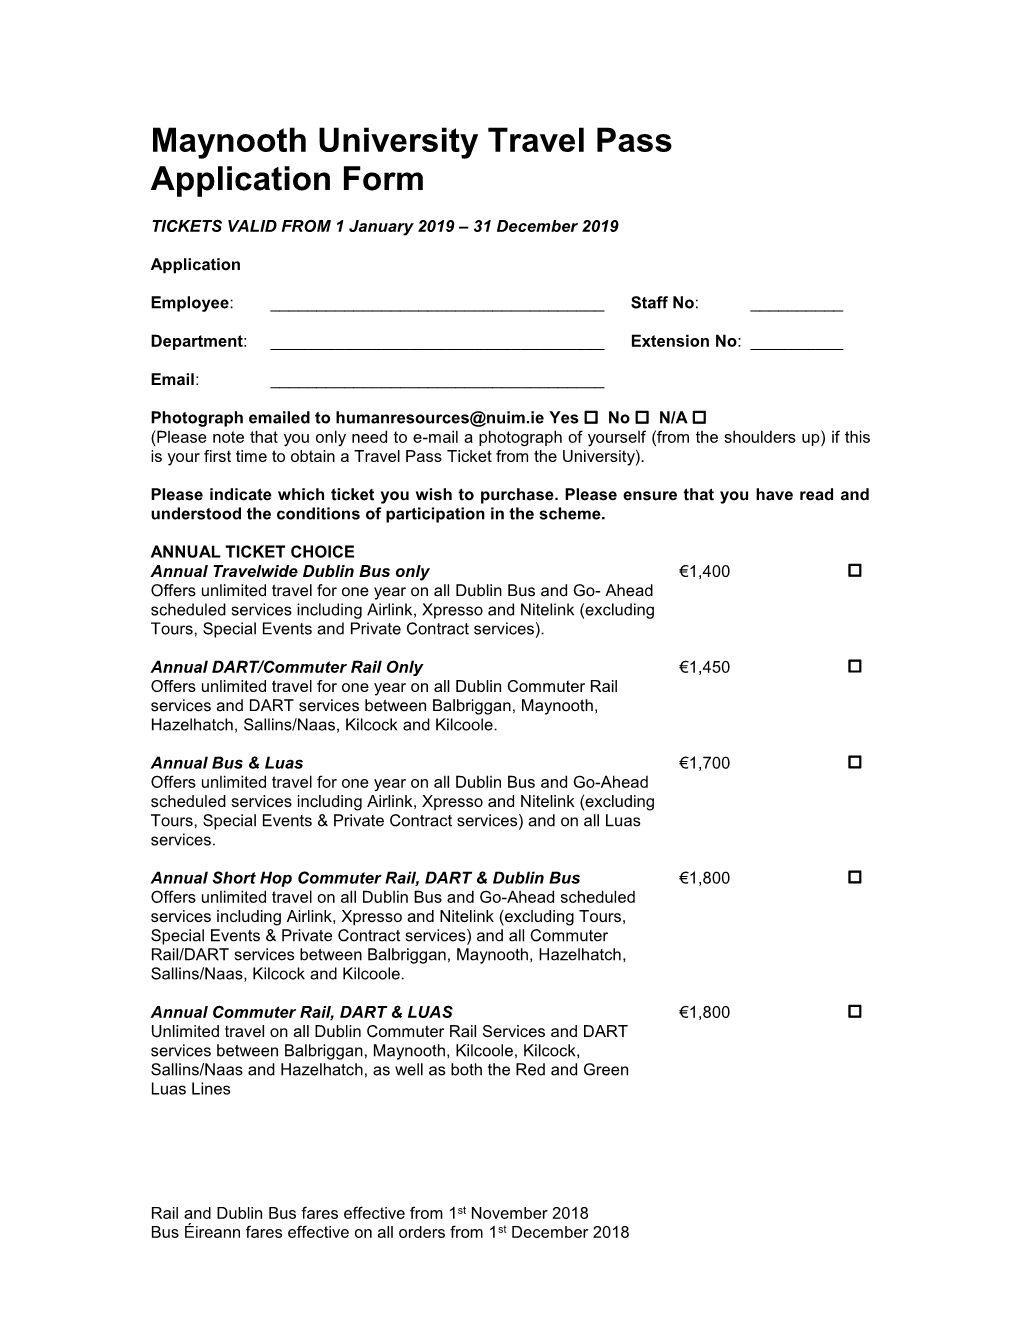 Maynooth University Travel Pass Application Form